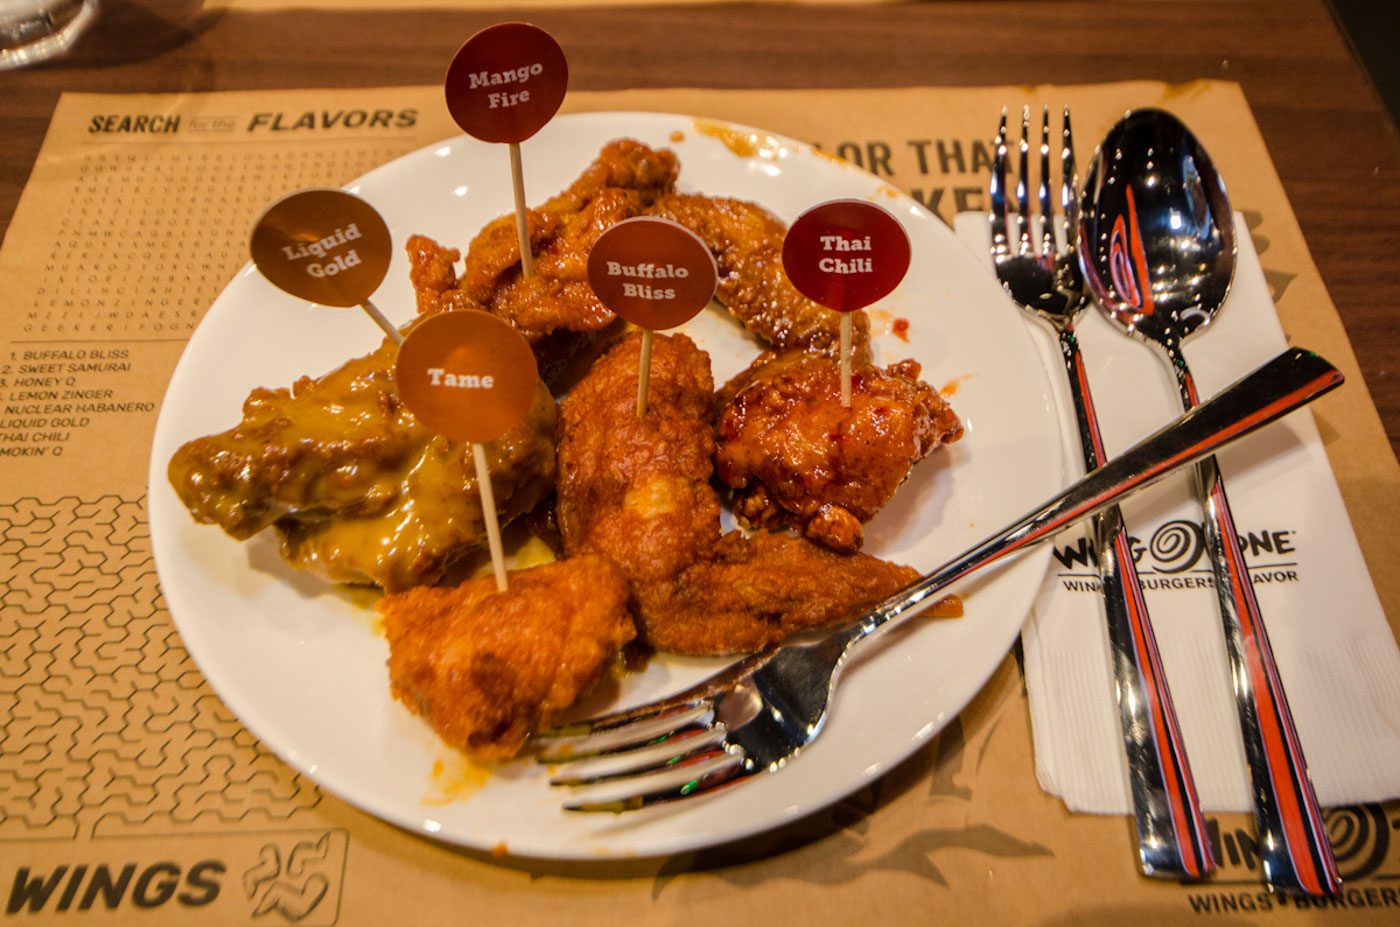 DIFFERENT FLAVORS. You can choose your sauces for the wings such as buffalo bliss, Thai chili, and mango fire. 